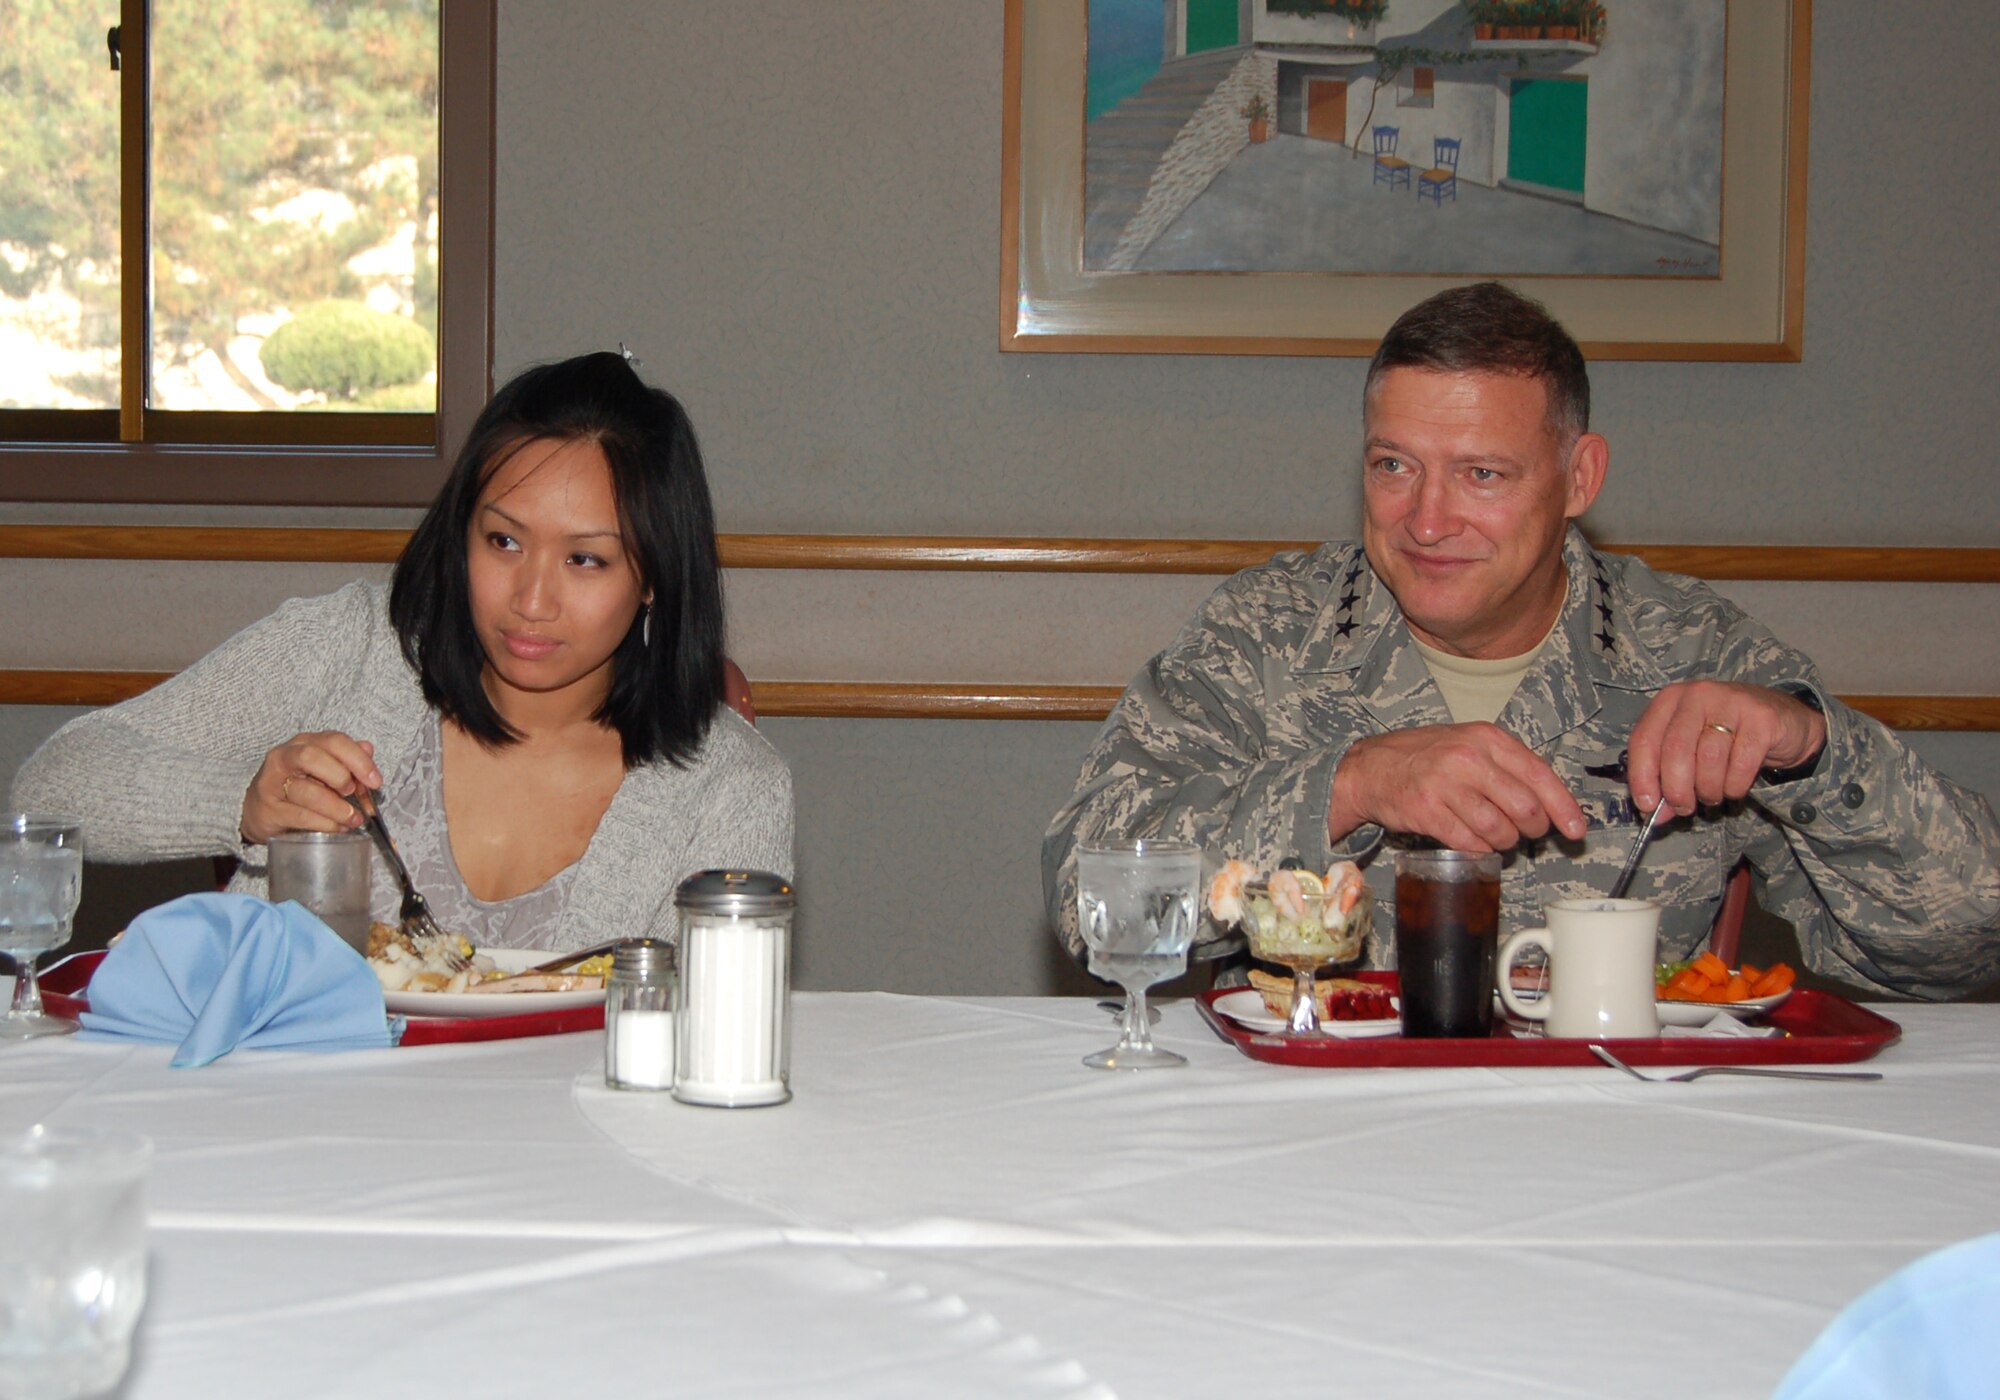 KUNSAN AIR BASE, Republic of Korea—Senior Airman Quyen Luong of the 8th Fighter Wing Chapel enjoys Thanksgiving dinner with Gen. Gary North, Pacific Air Forces commander, the O’Malley Dining Facility here 26 November.  Gen. North visited Kunsan with senior leaders from PACAF and the 7th Air Force and members of the PACAF Civilian Advisory Council to help serve the holiday meal and dine with Wolf Pack members.  Airmen enjoyed dinner and conversation with leaders during this event.  (U.S. Air Force photo/Master Sgt. Anna Hayman)